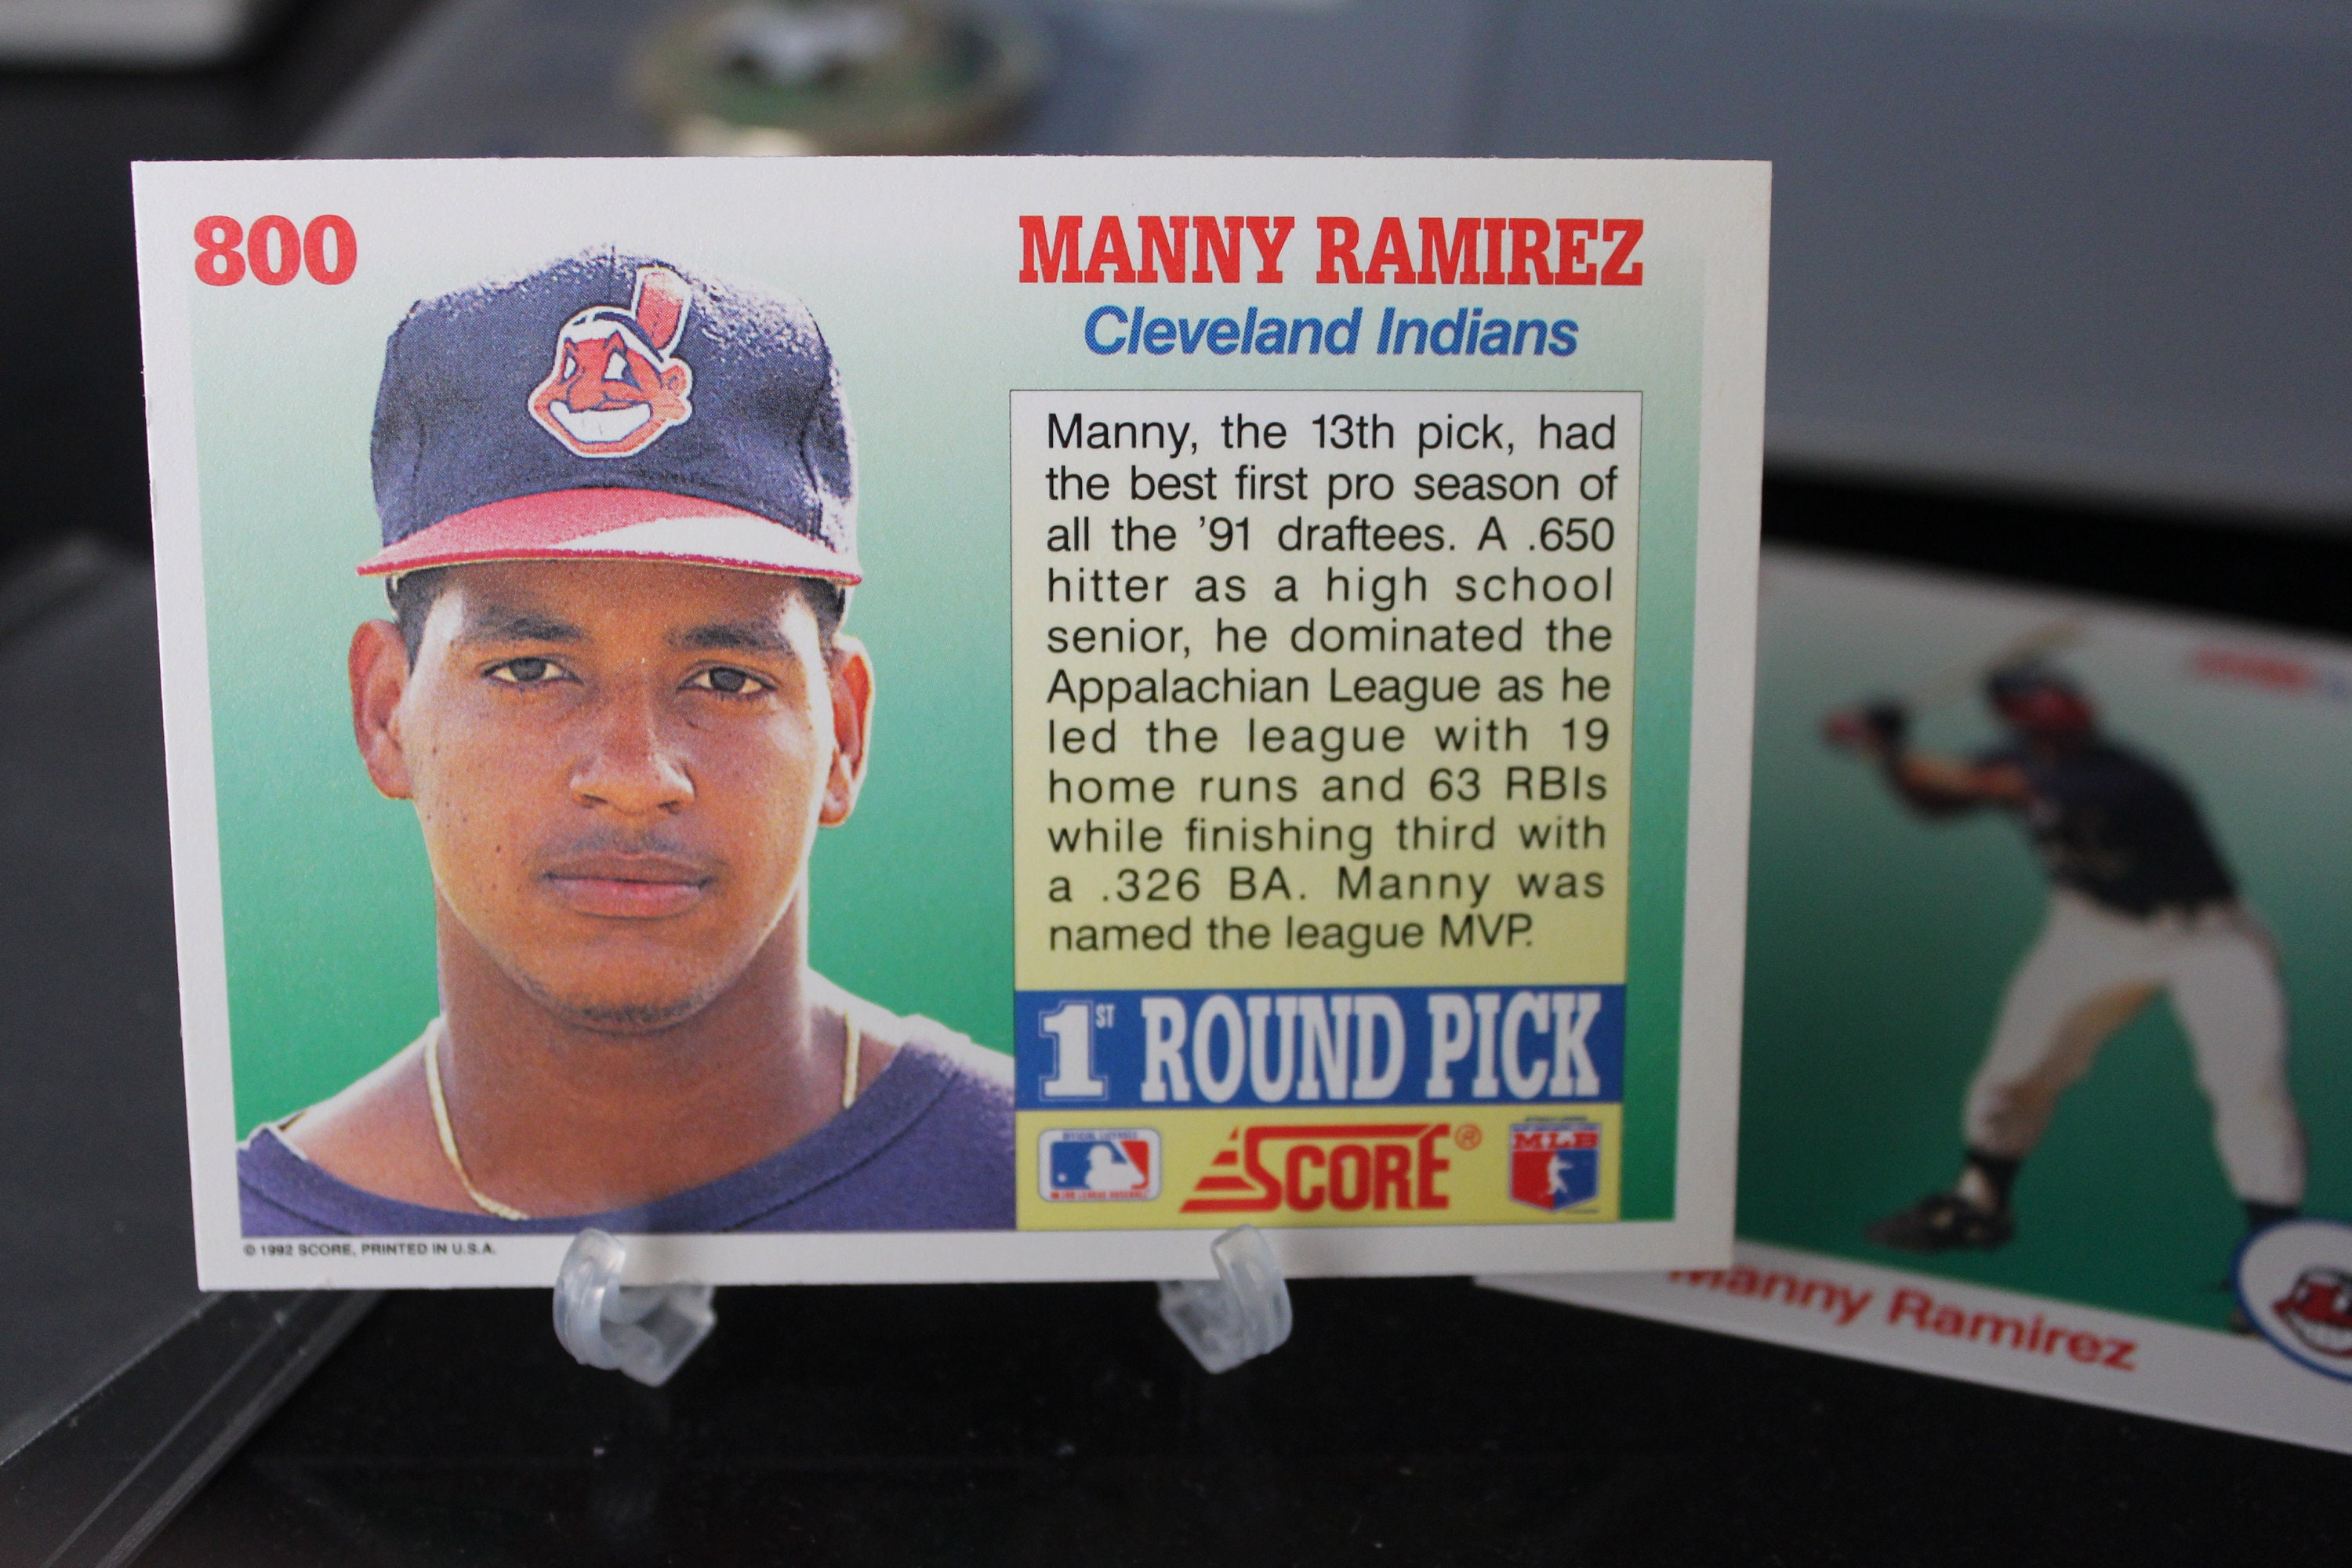 Manny Ramirez was many things; but first, he was a Cleveland